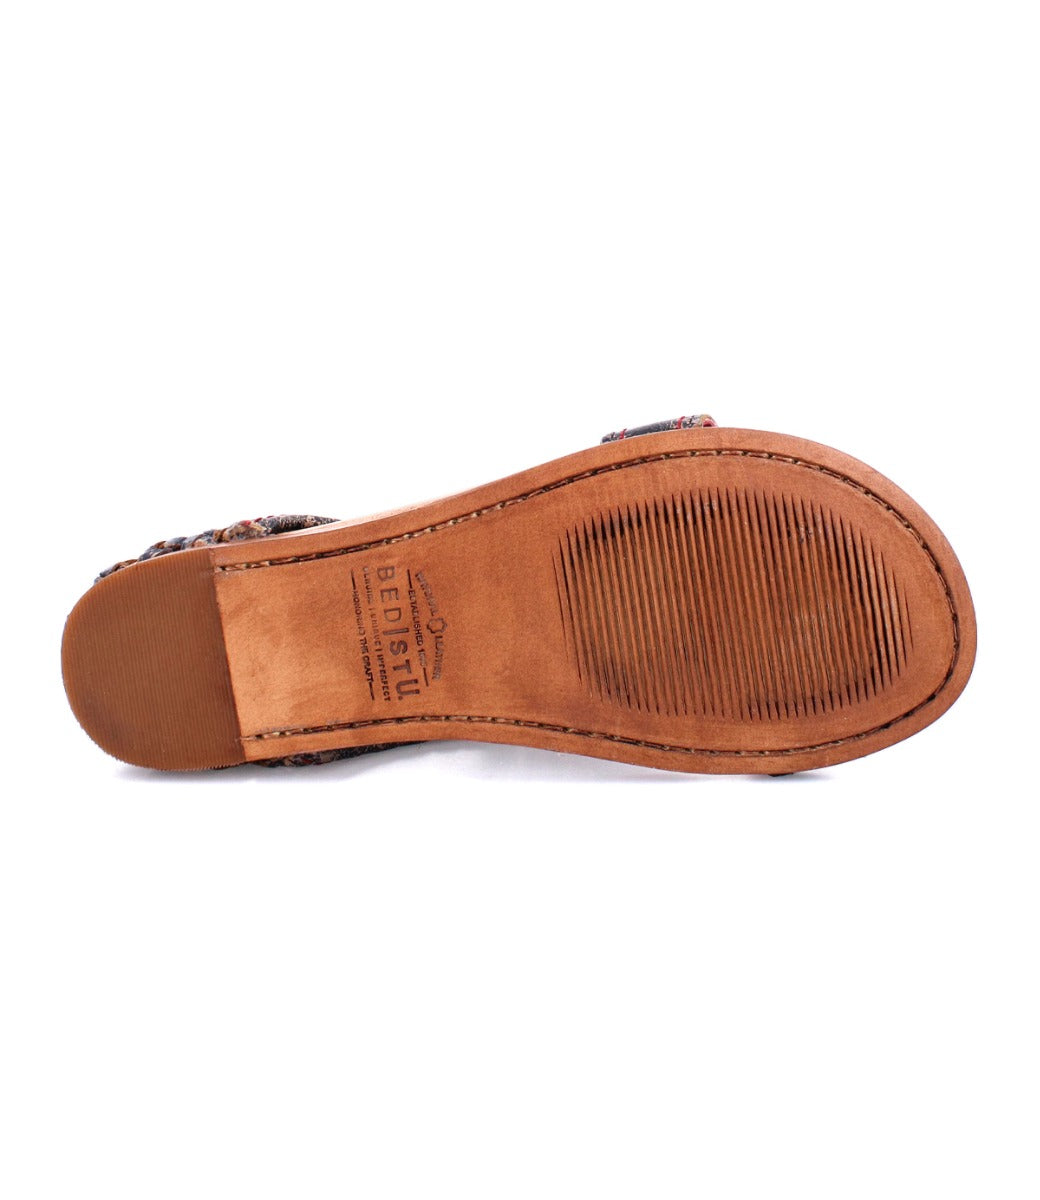 The back view of a women's Bed Stu sandals.